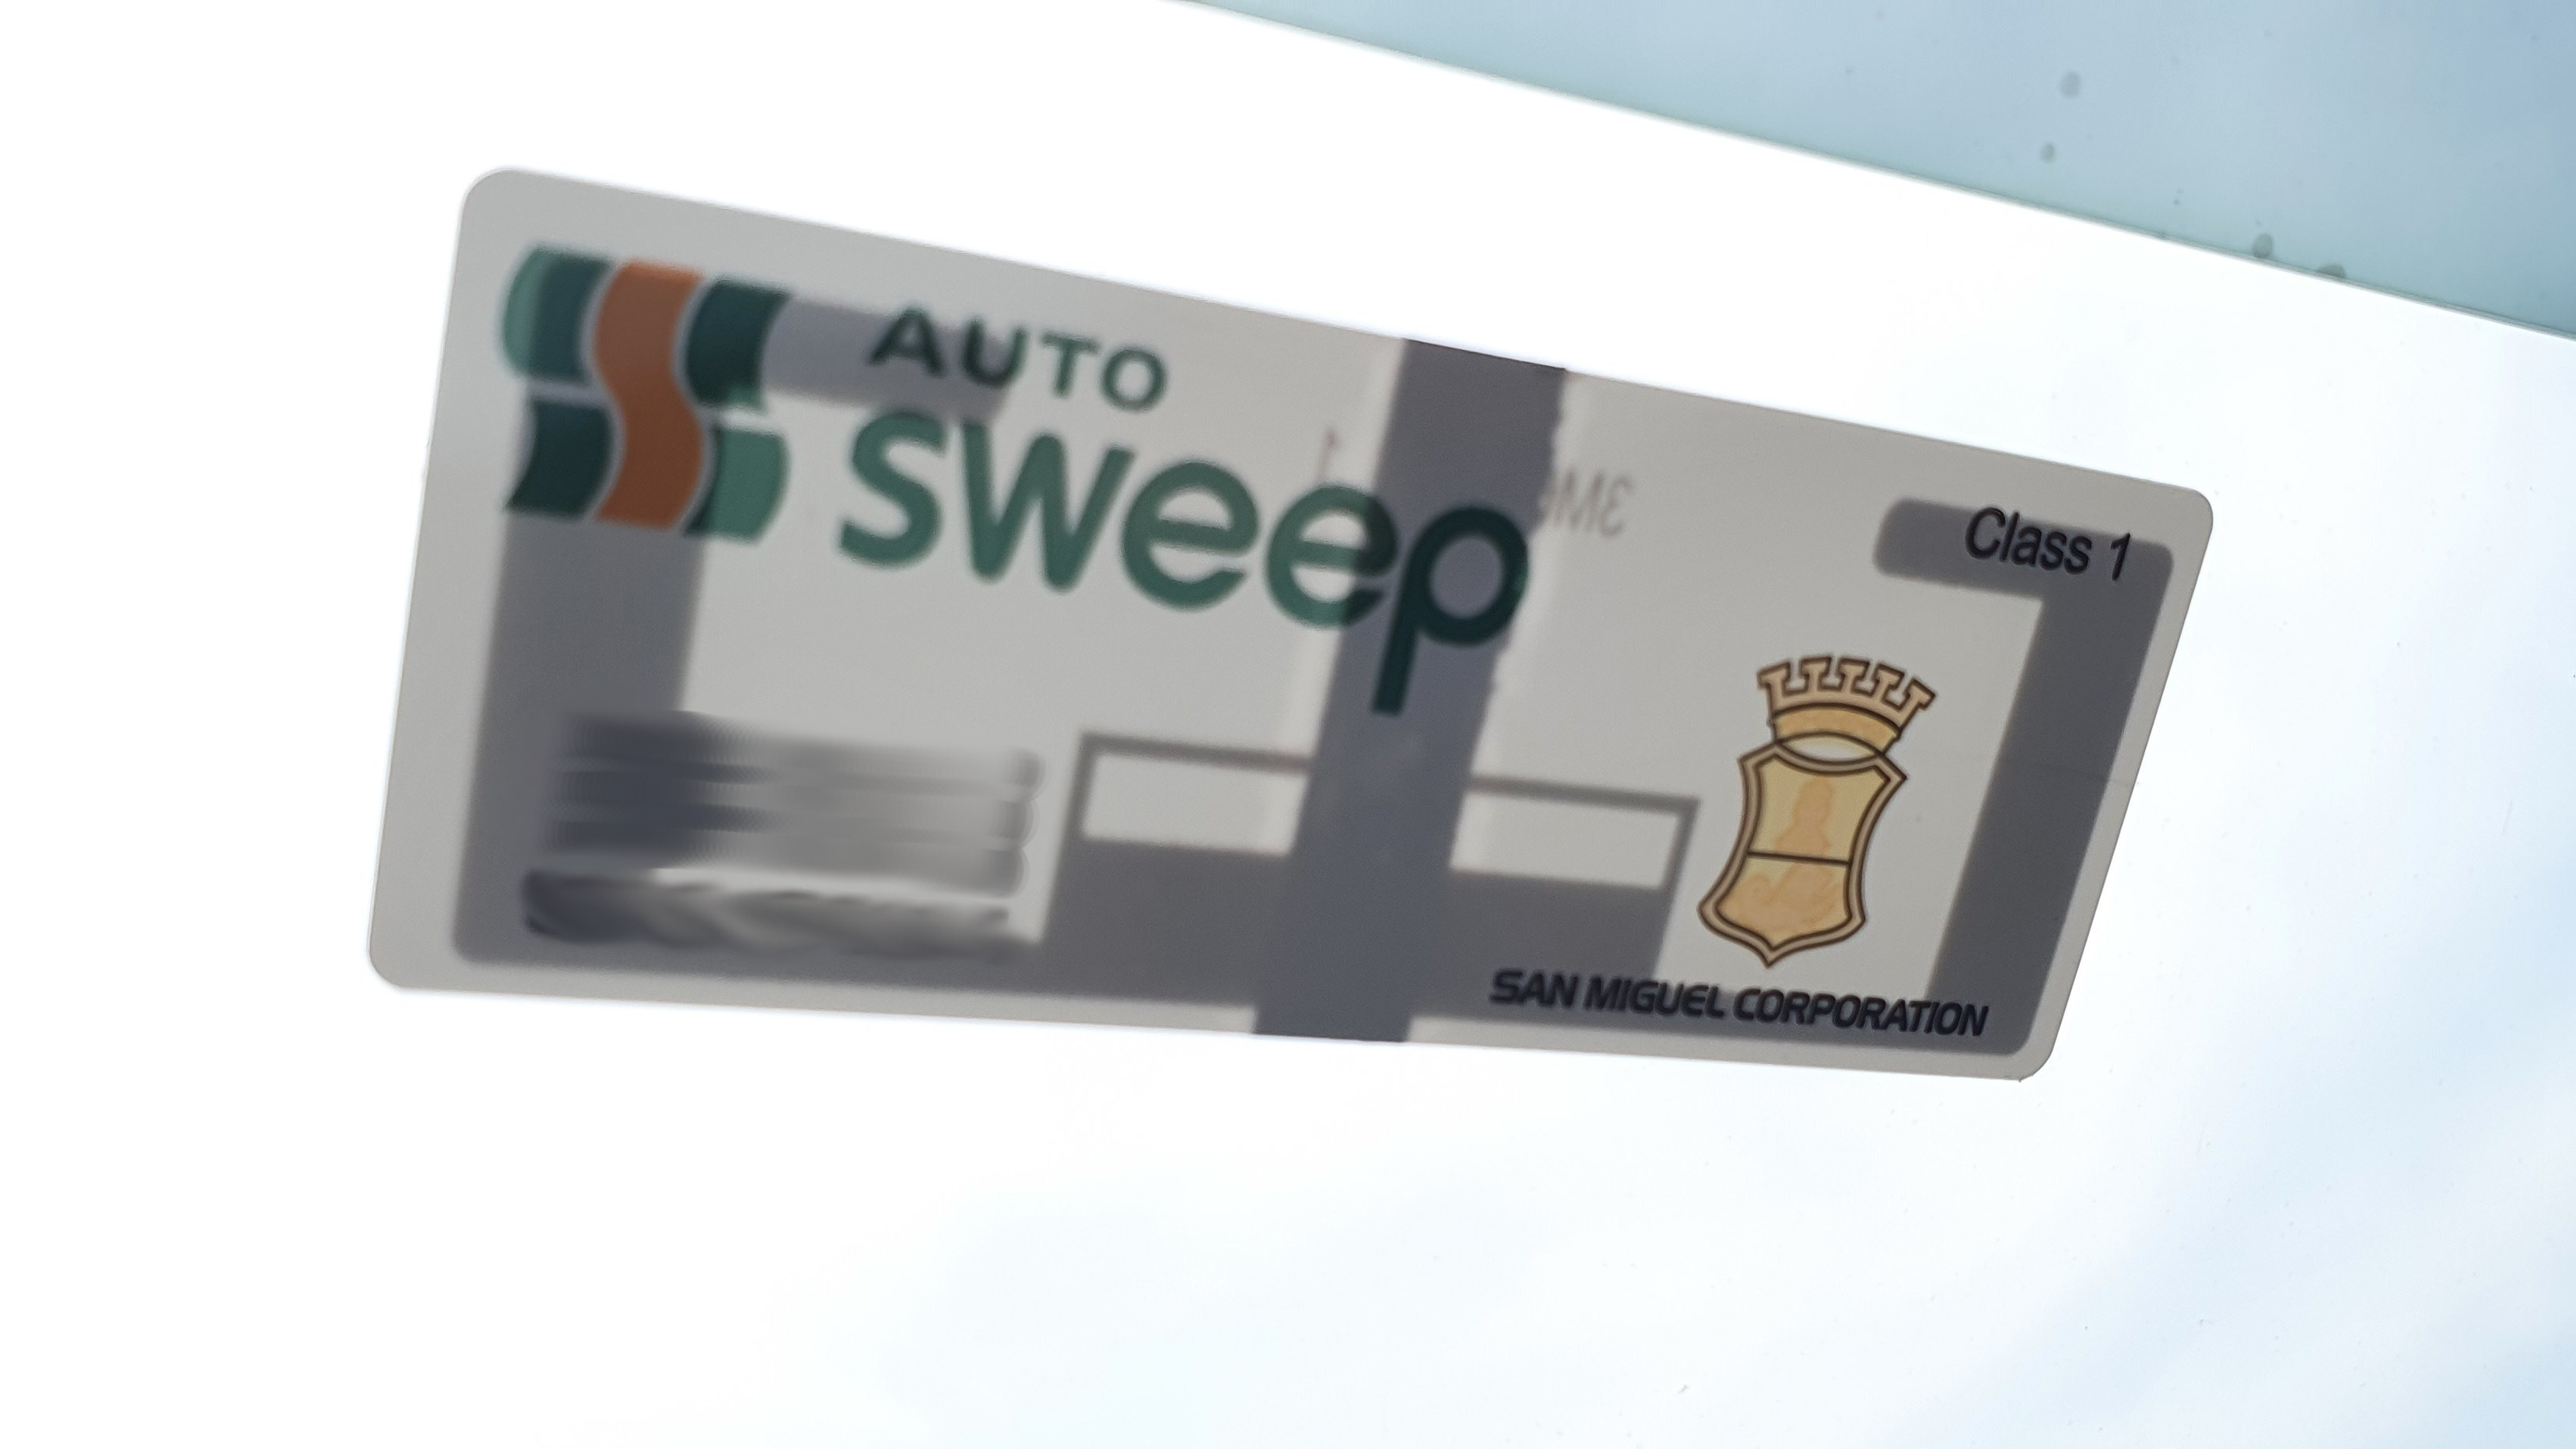 Autosweep, RFID sticker, tollway, San Miguel Corporation